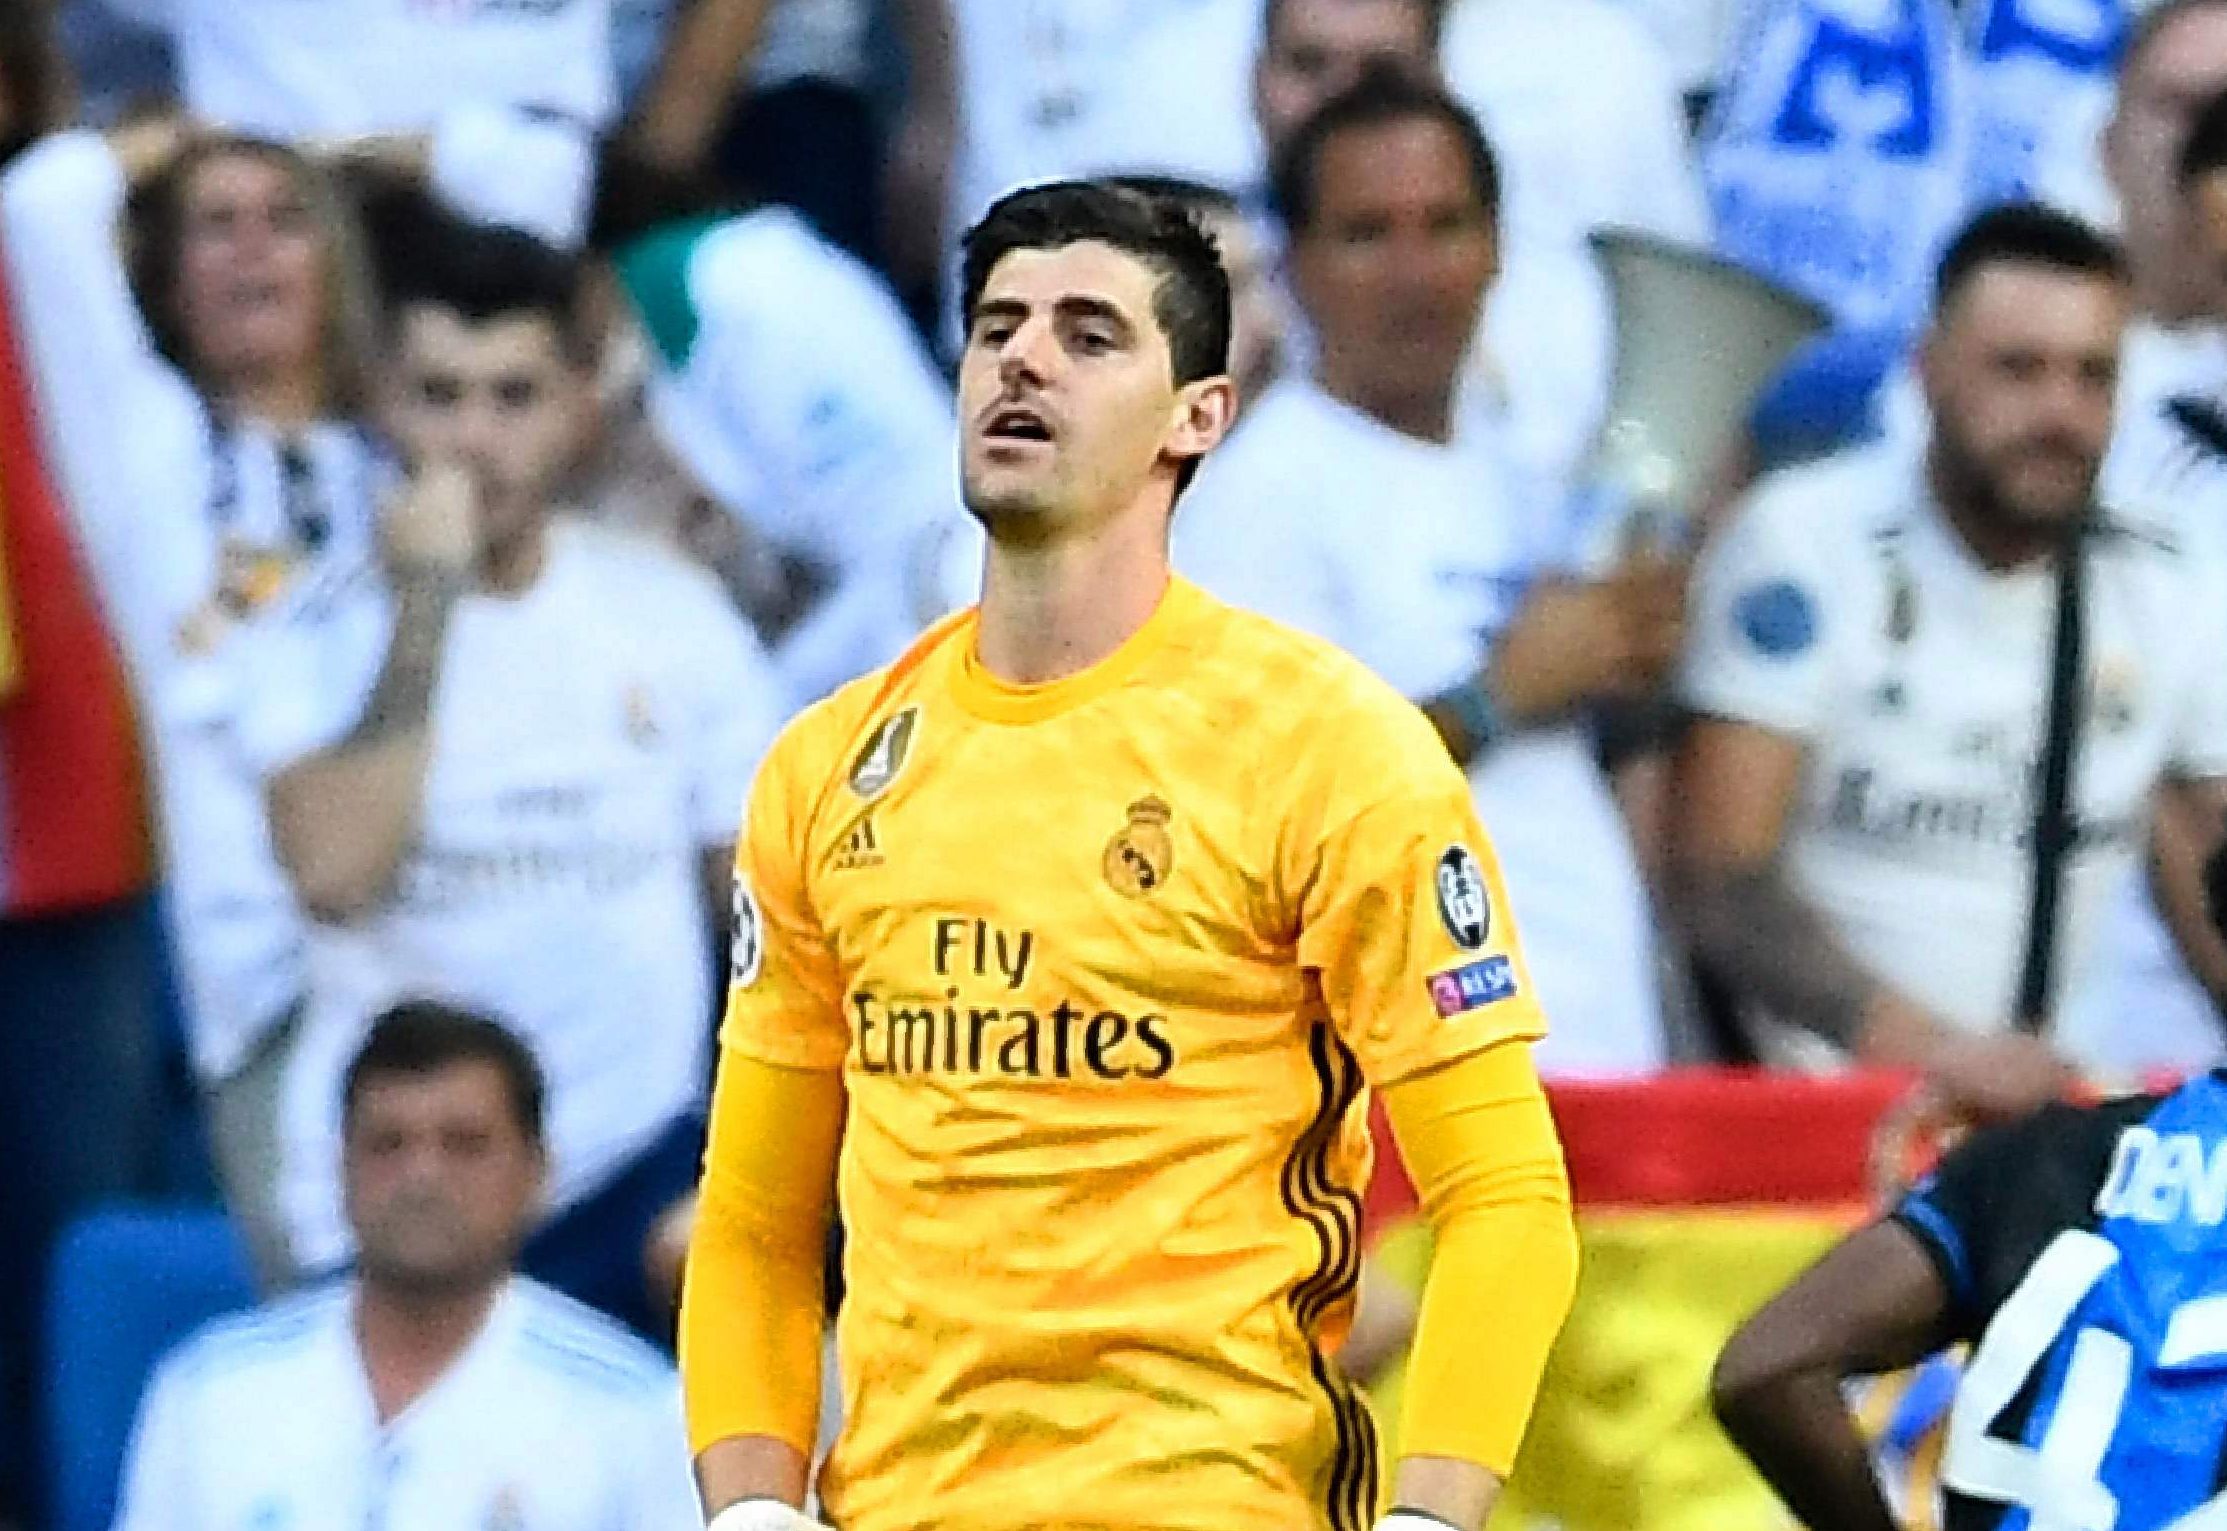 BAD NEWS: Real Madrid's Thibaut Courtois Sidelined by ACL Injury in Left Knee Ahead of Season Opener Against Athletic Bilbao